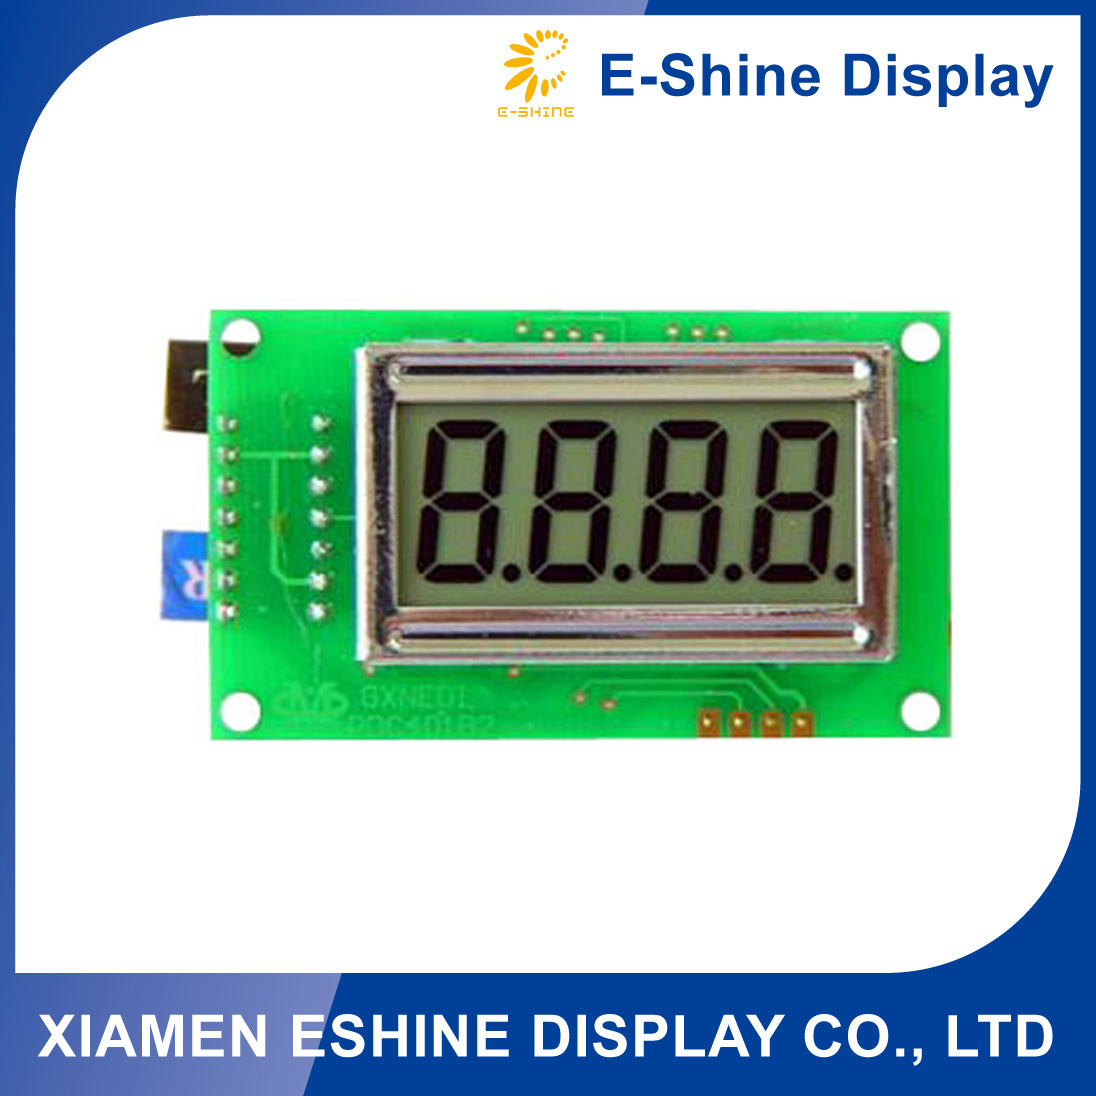 2.0 Inch Customized LCD Display with Green Backlight